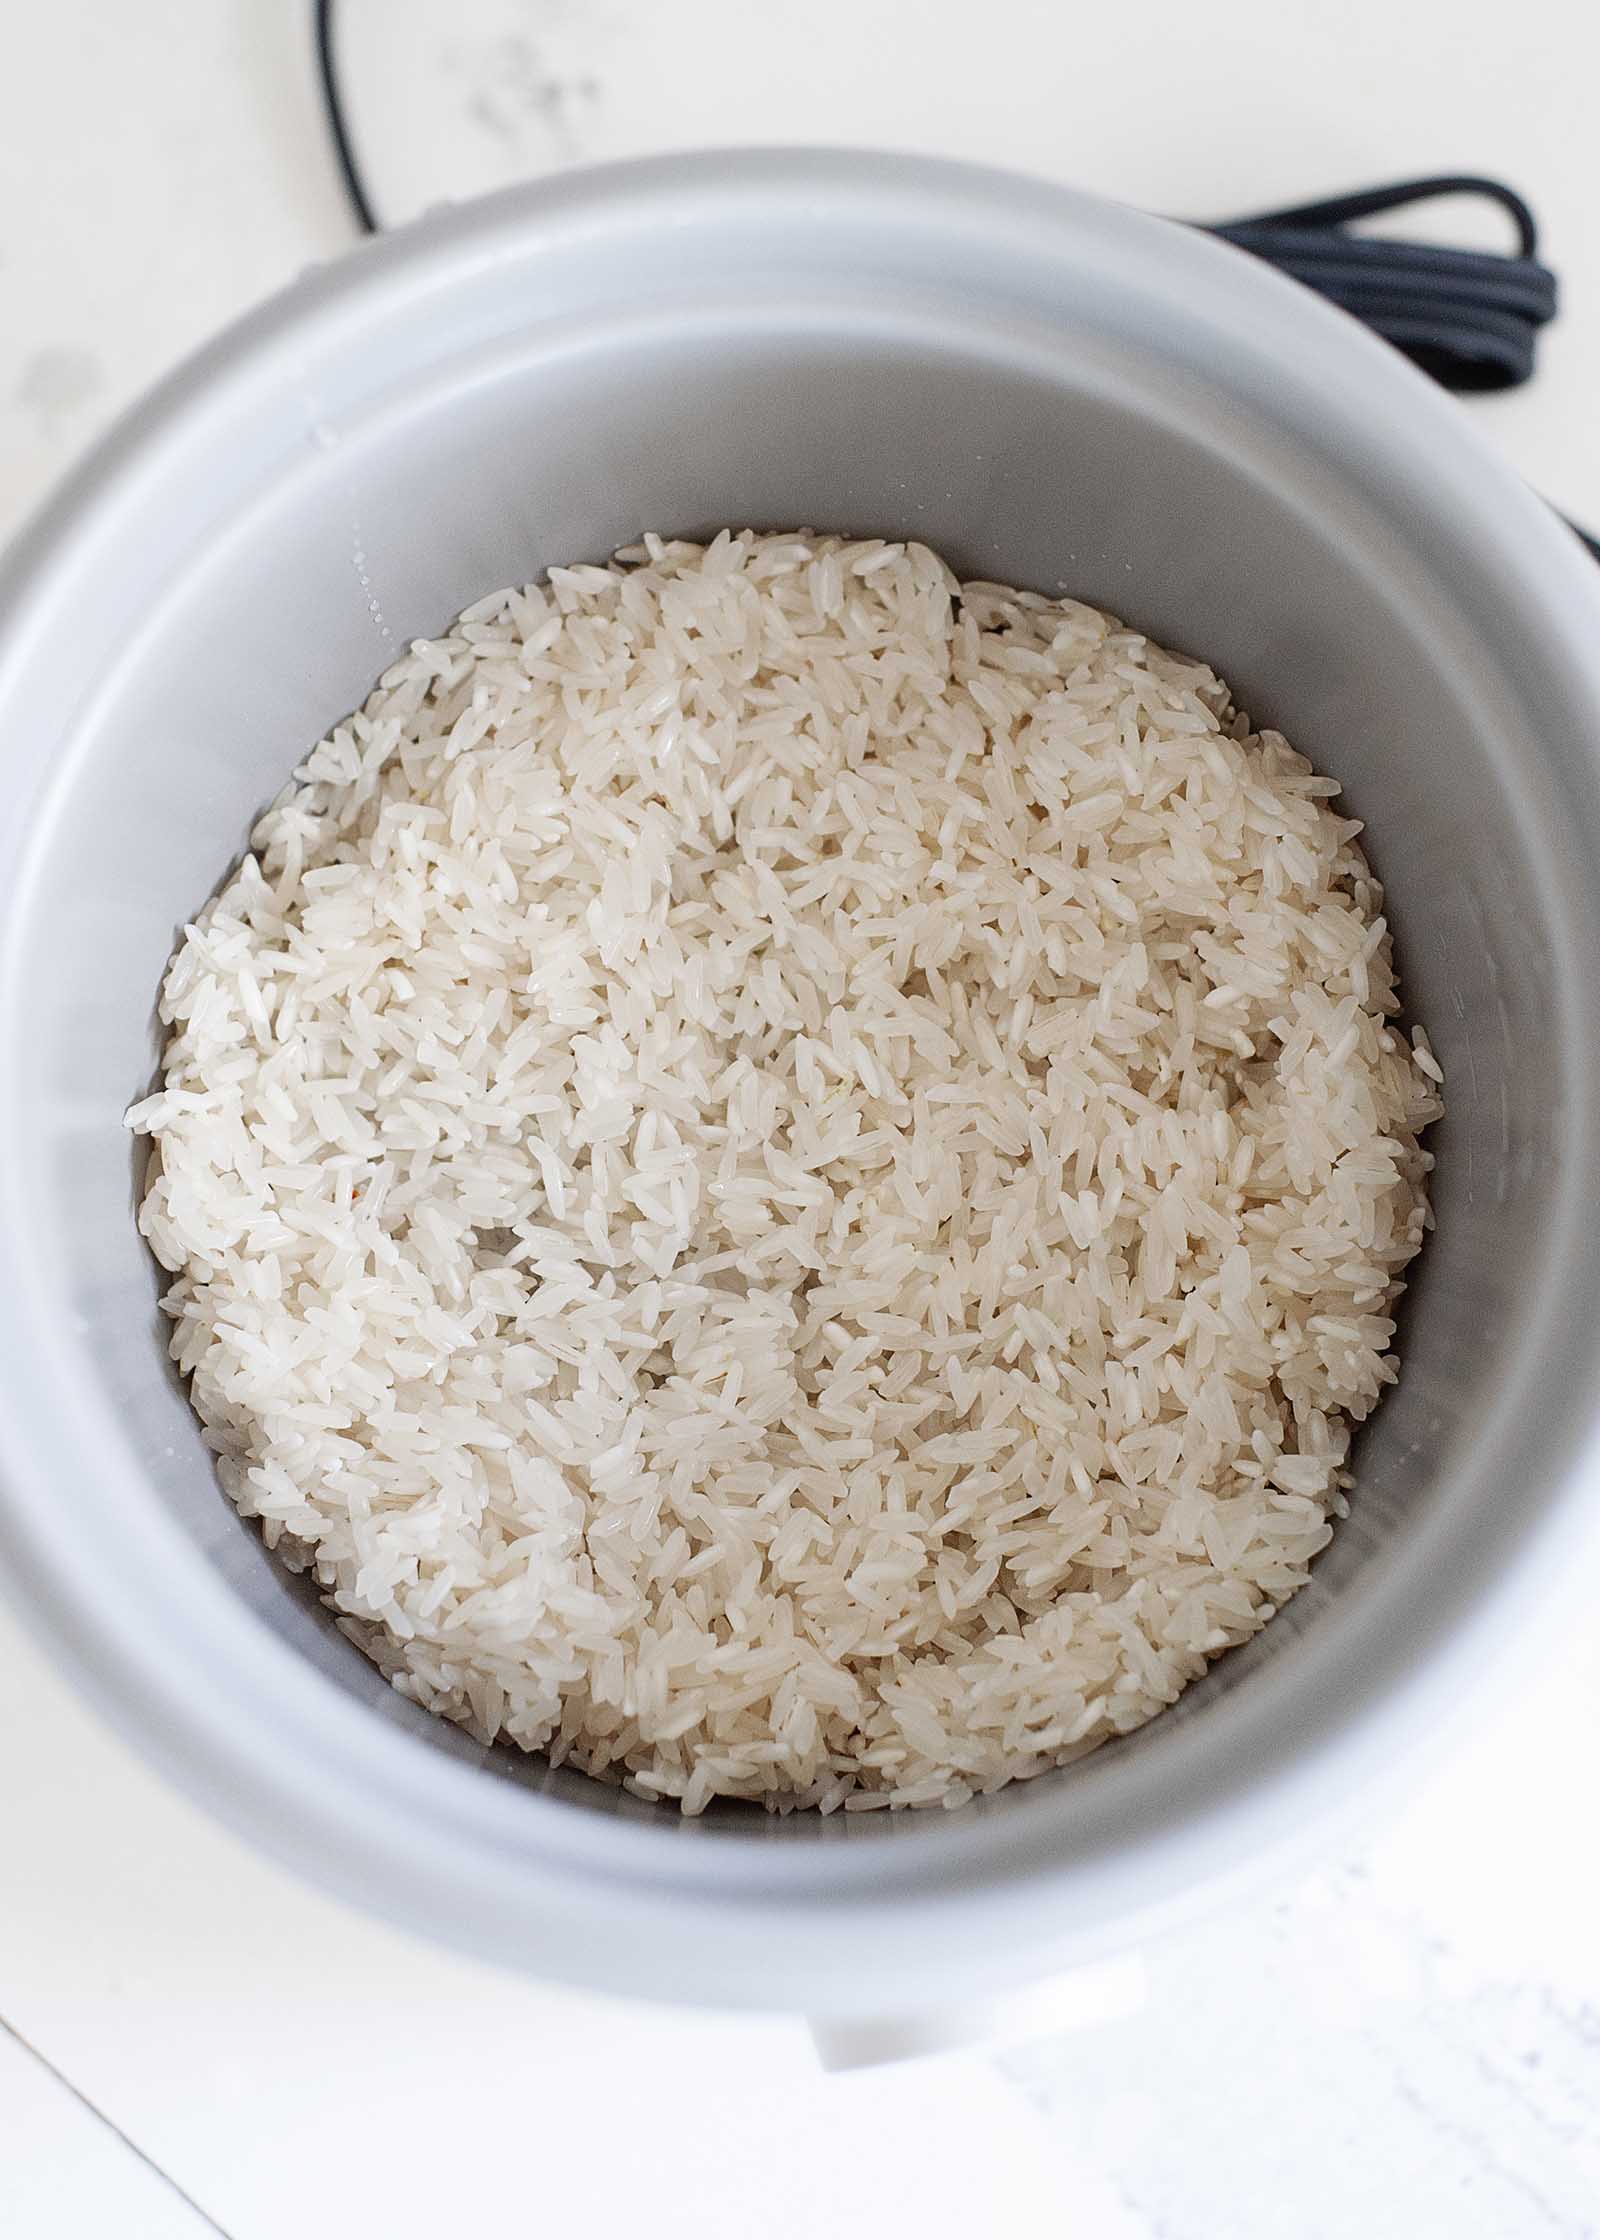 Overhead view of the inside of a white rice cooker with uncooked rice inside. The cord is in partial view behind the cooker.